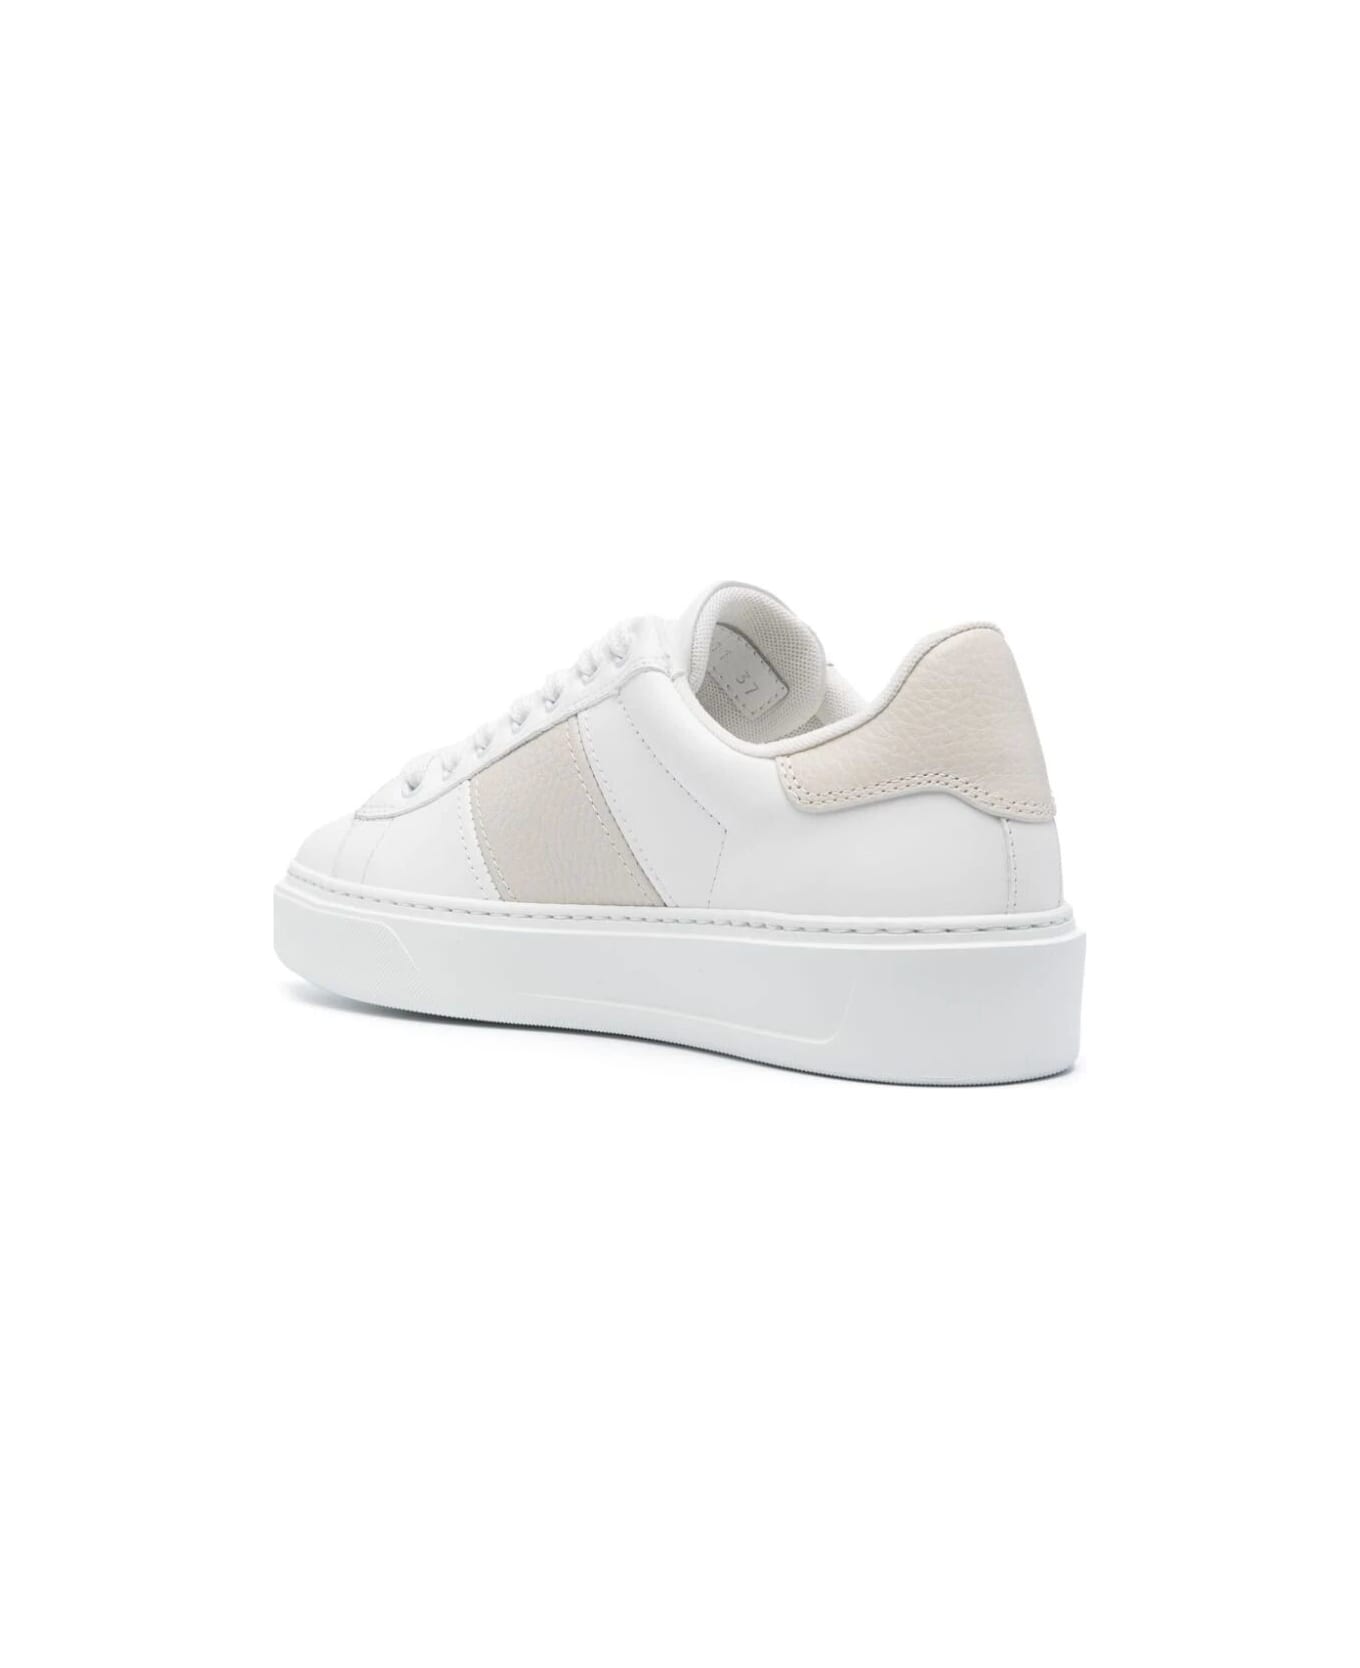 Woolrich Classic Court Sneakers - White Cream スニーカー